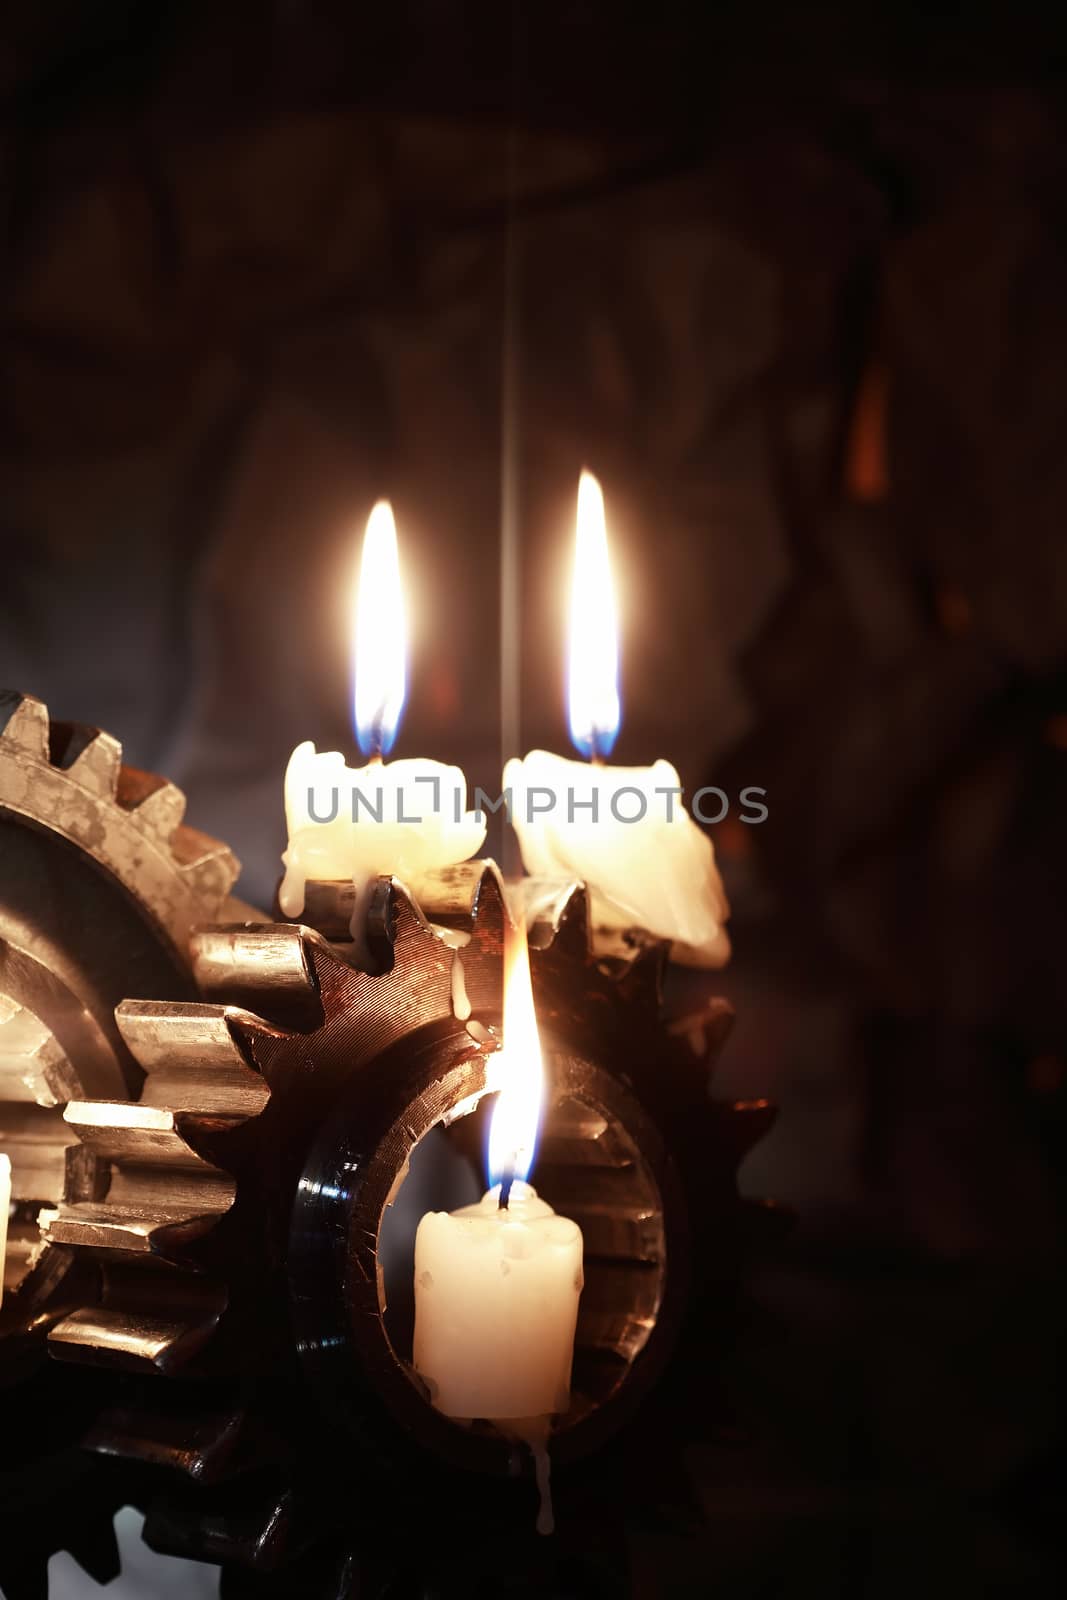 Lighting candles on old gears against dark background